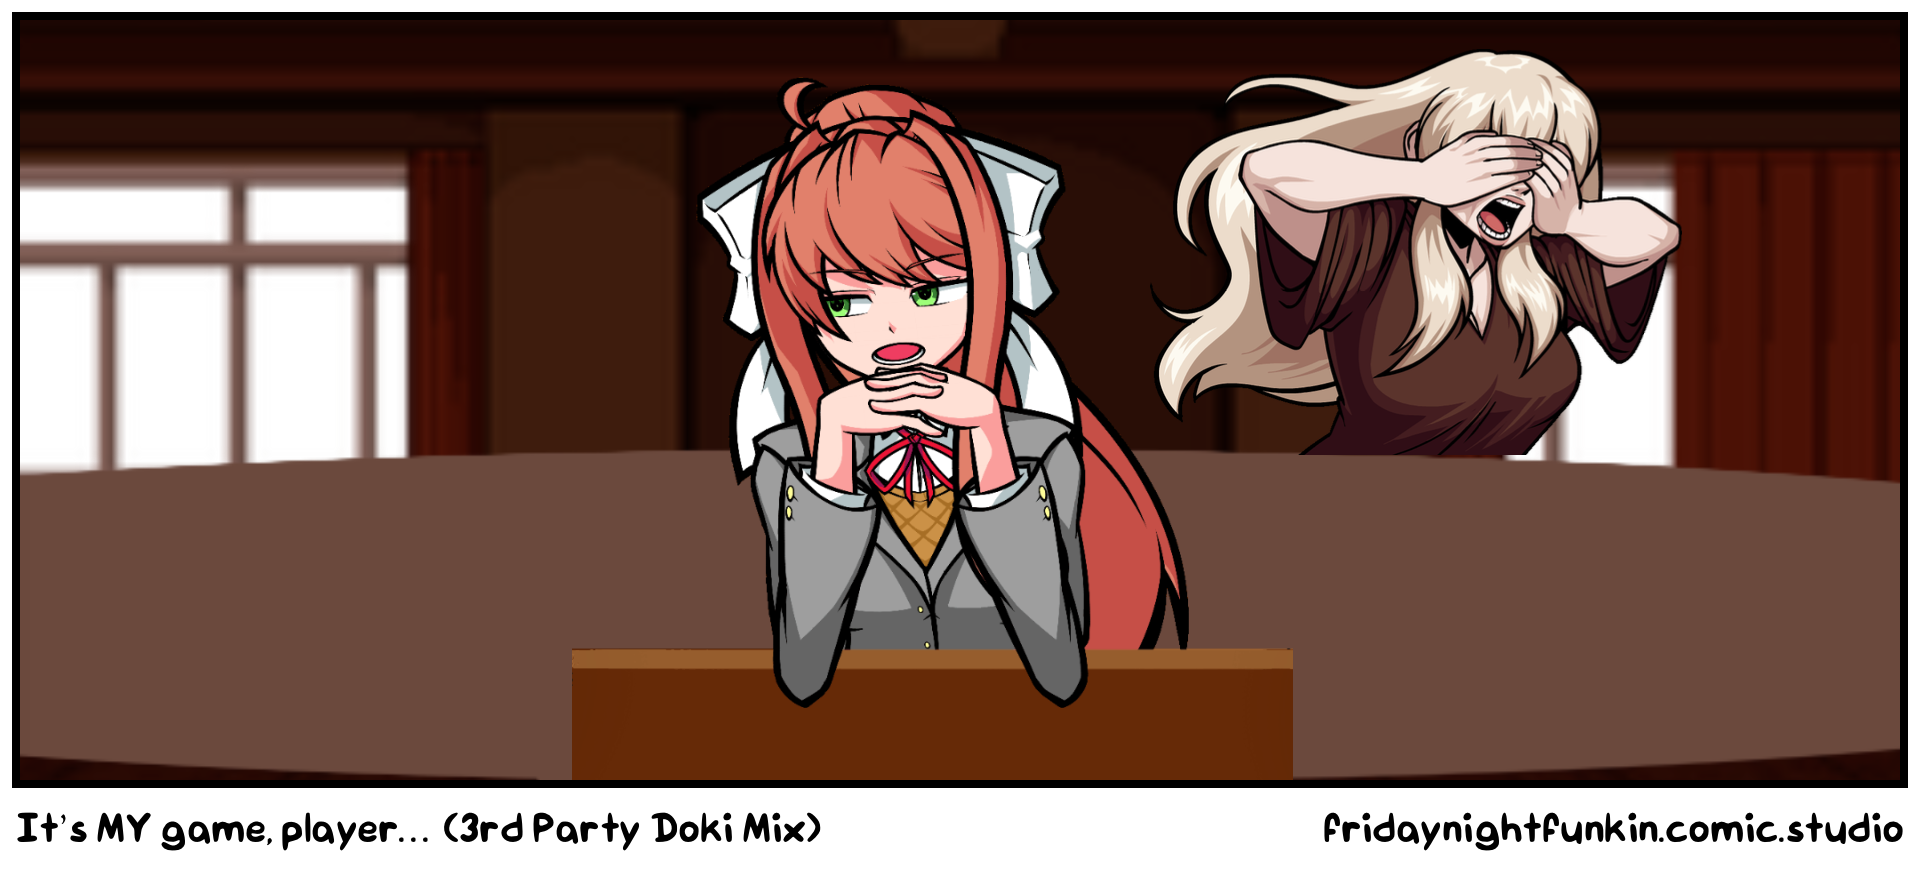 It’s MY game, player… (3rd Party Doki Mix)